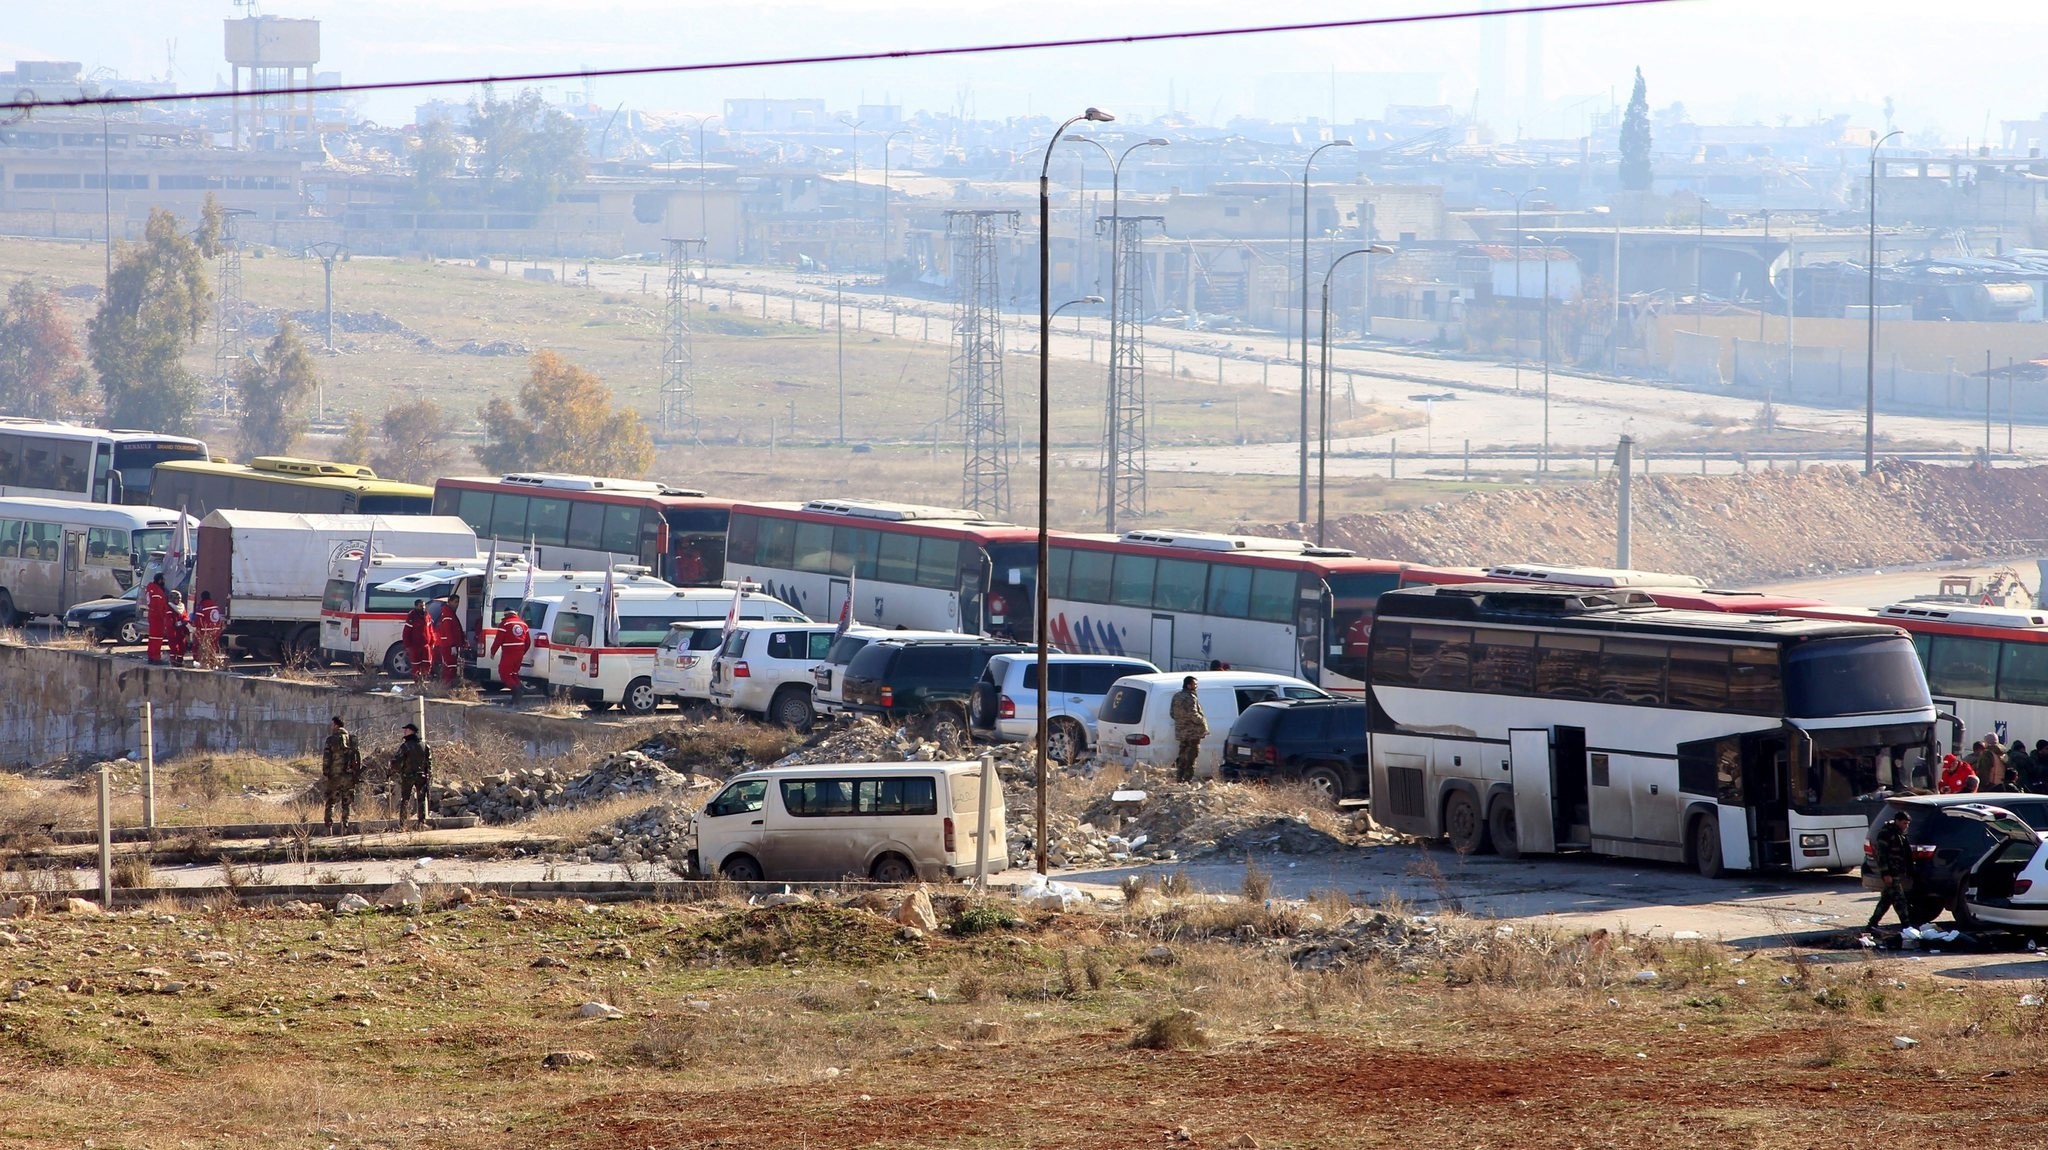 Buses wait to evacuate a group of fighters and their families from eastern neighborhoods of Aleppo, Syria, 19 December 2016. (EPA Photo)